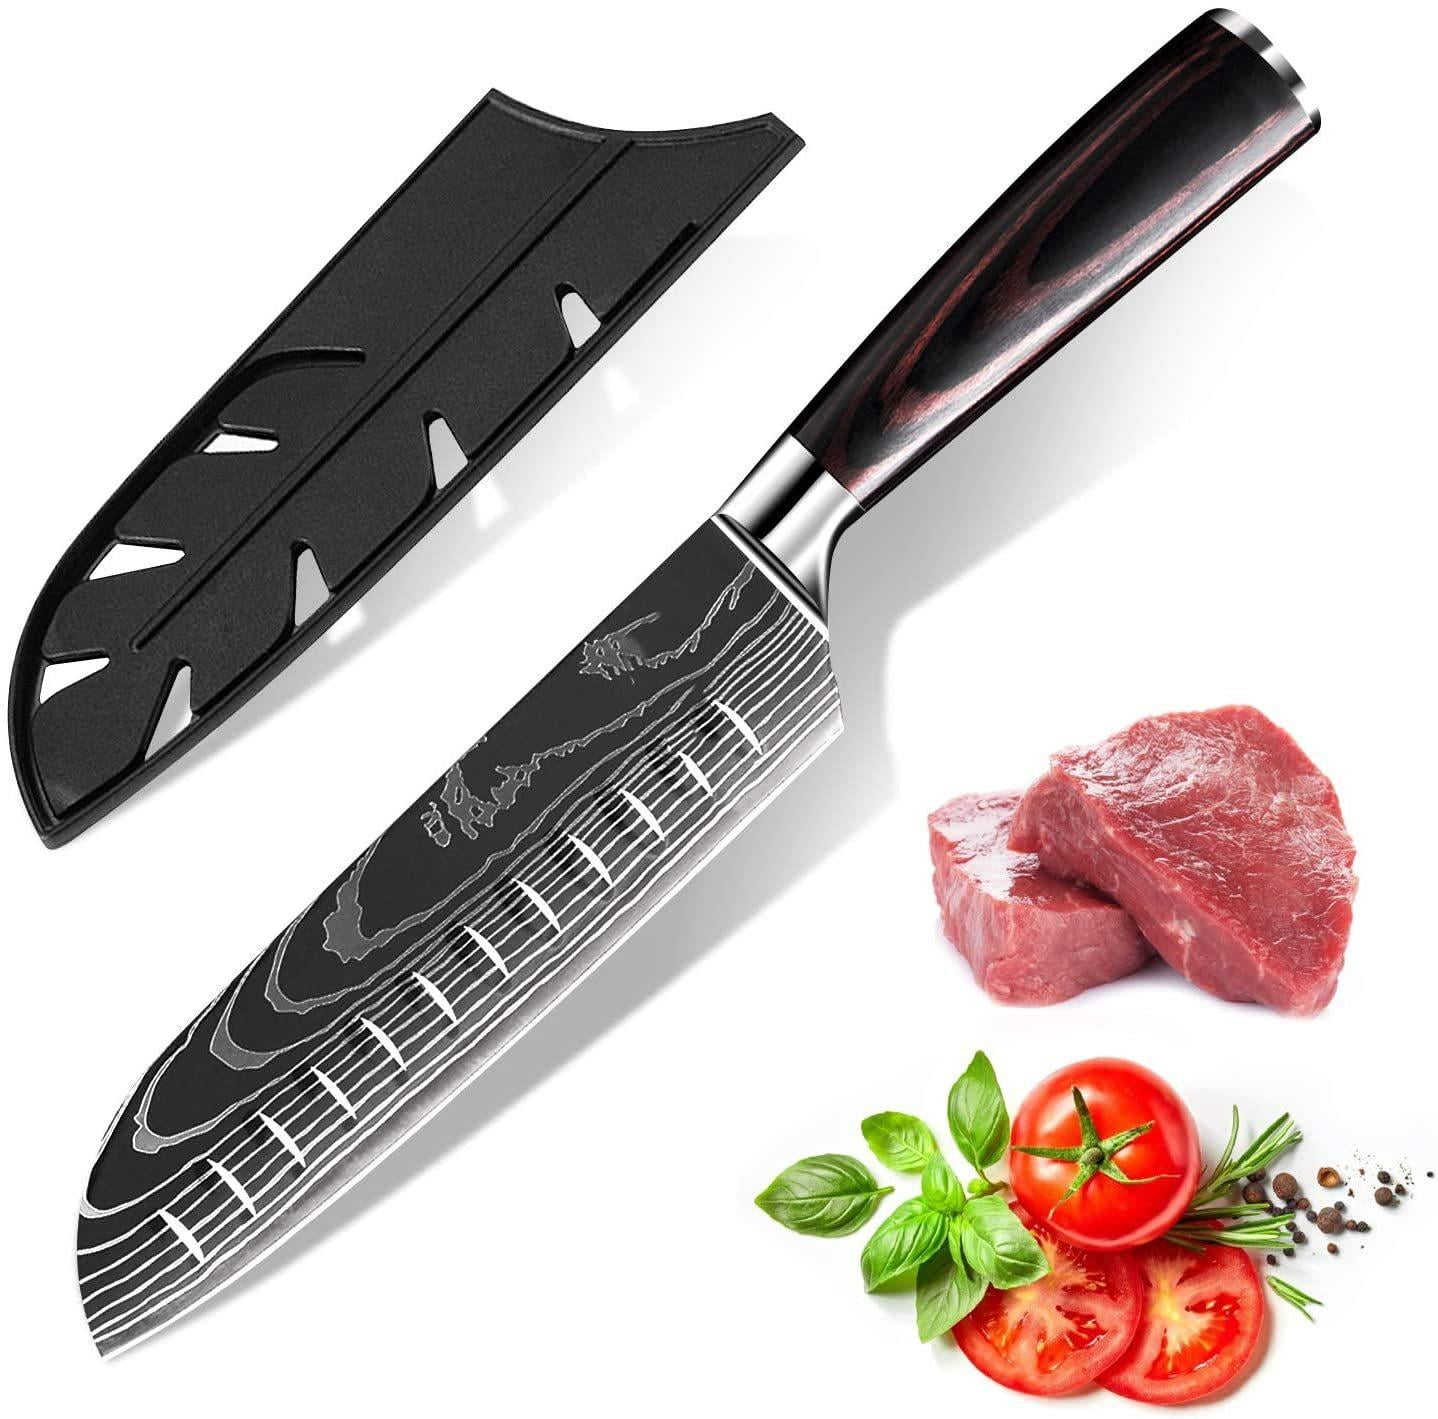 7-Inch Carbon Steel Kitchen Knife - Cookzhub